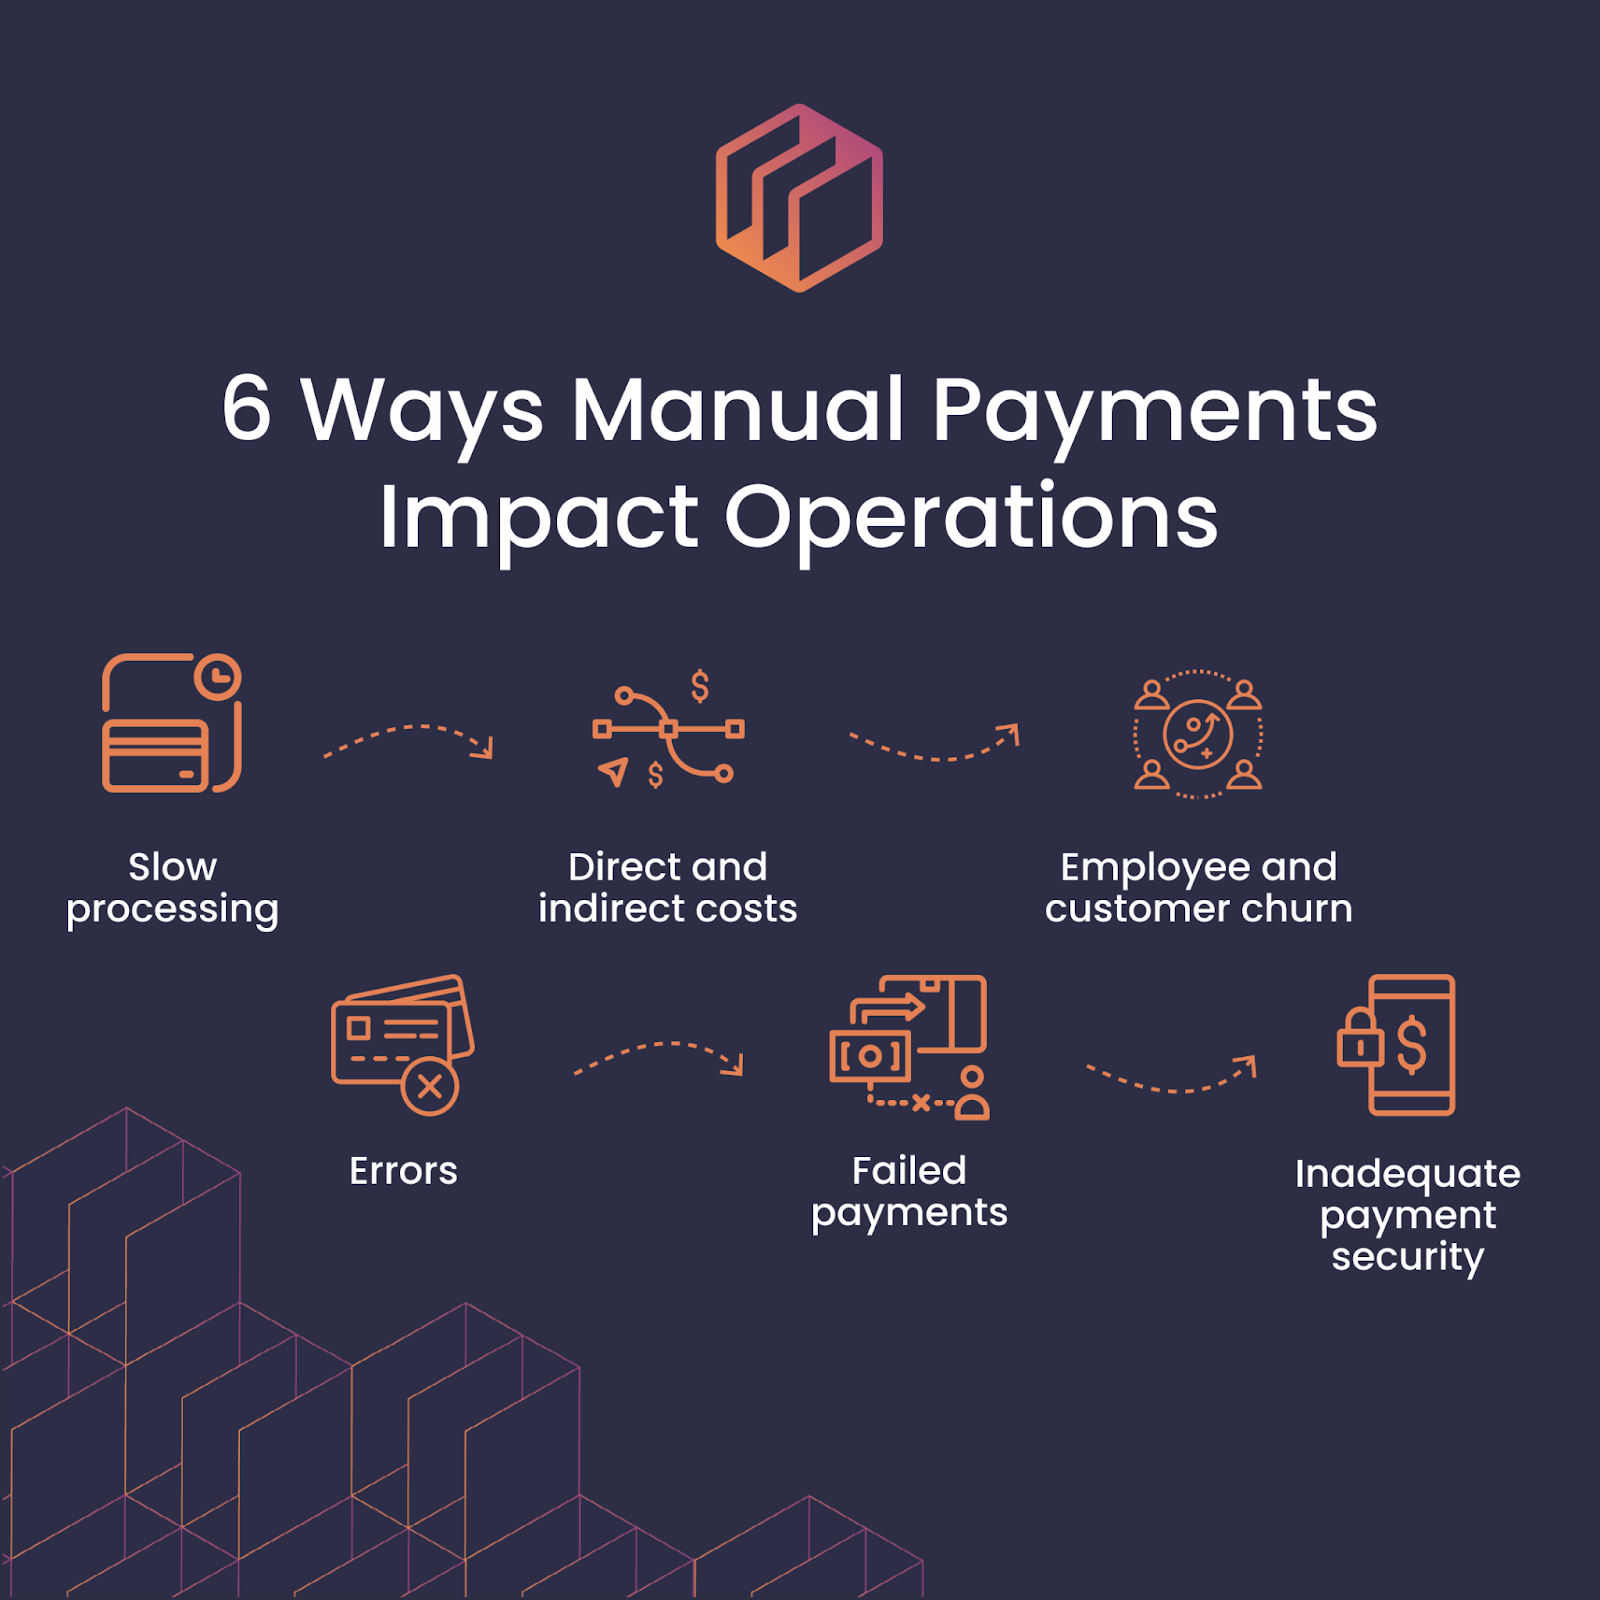 Infographic showing six negative impacts of manual payments on operations